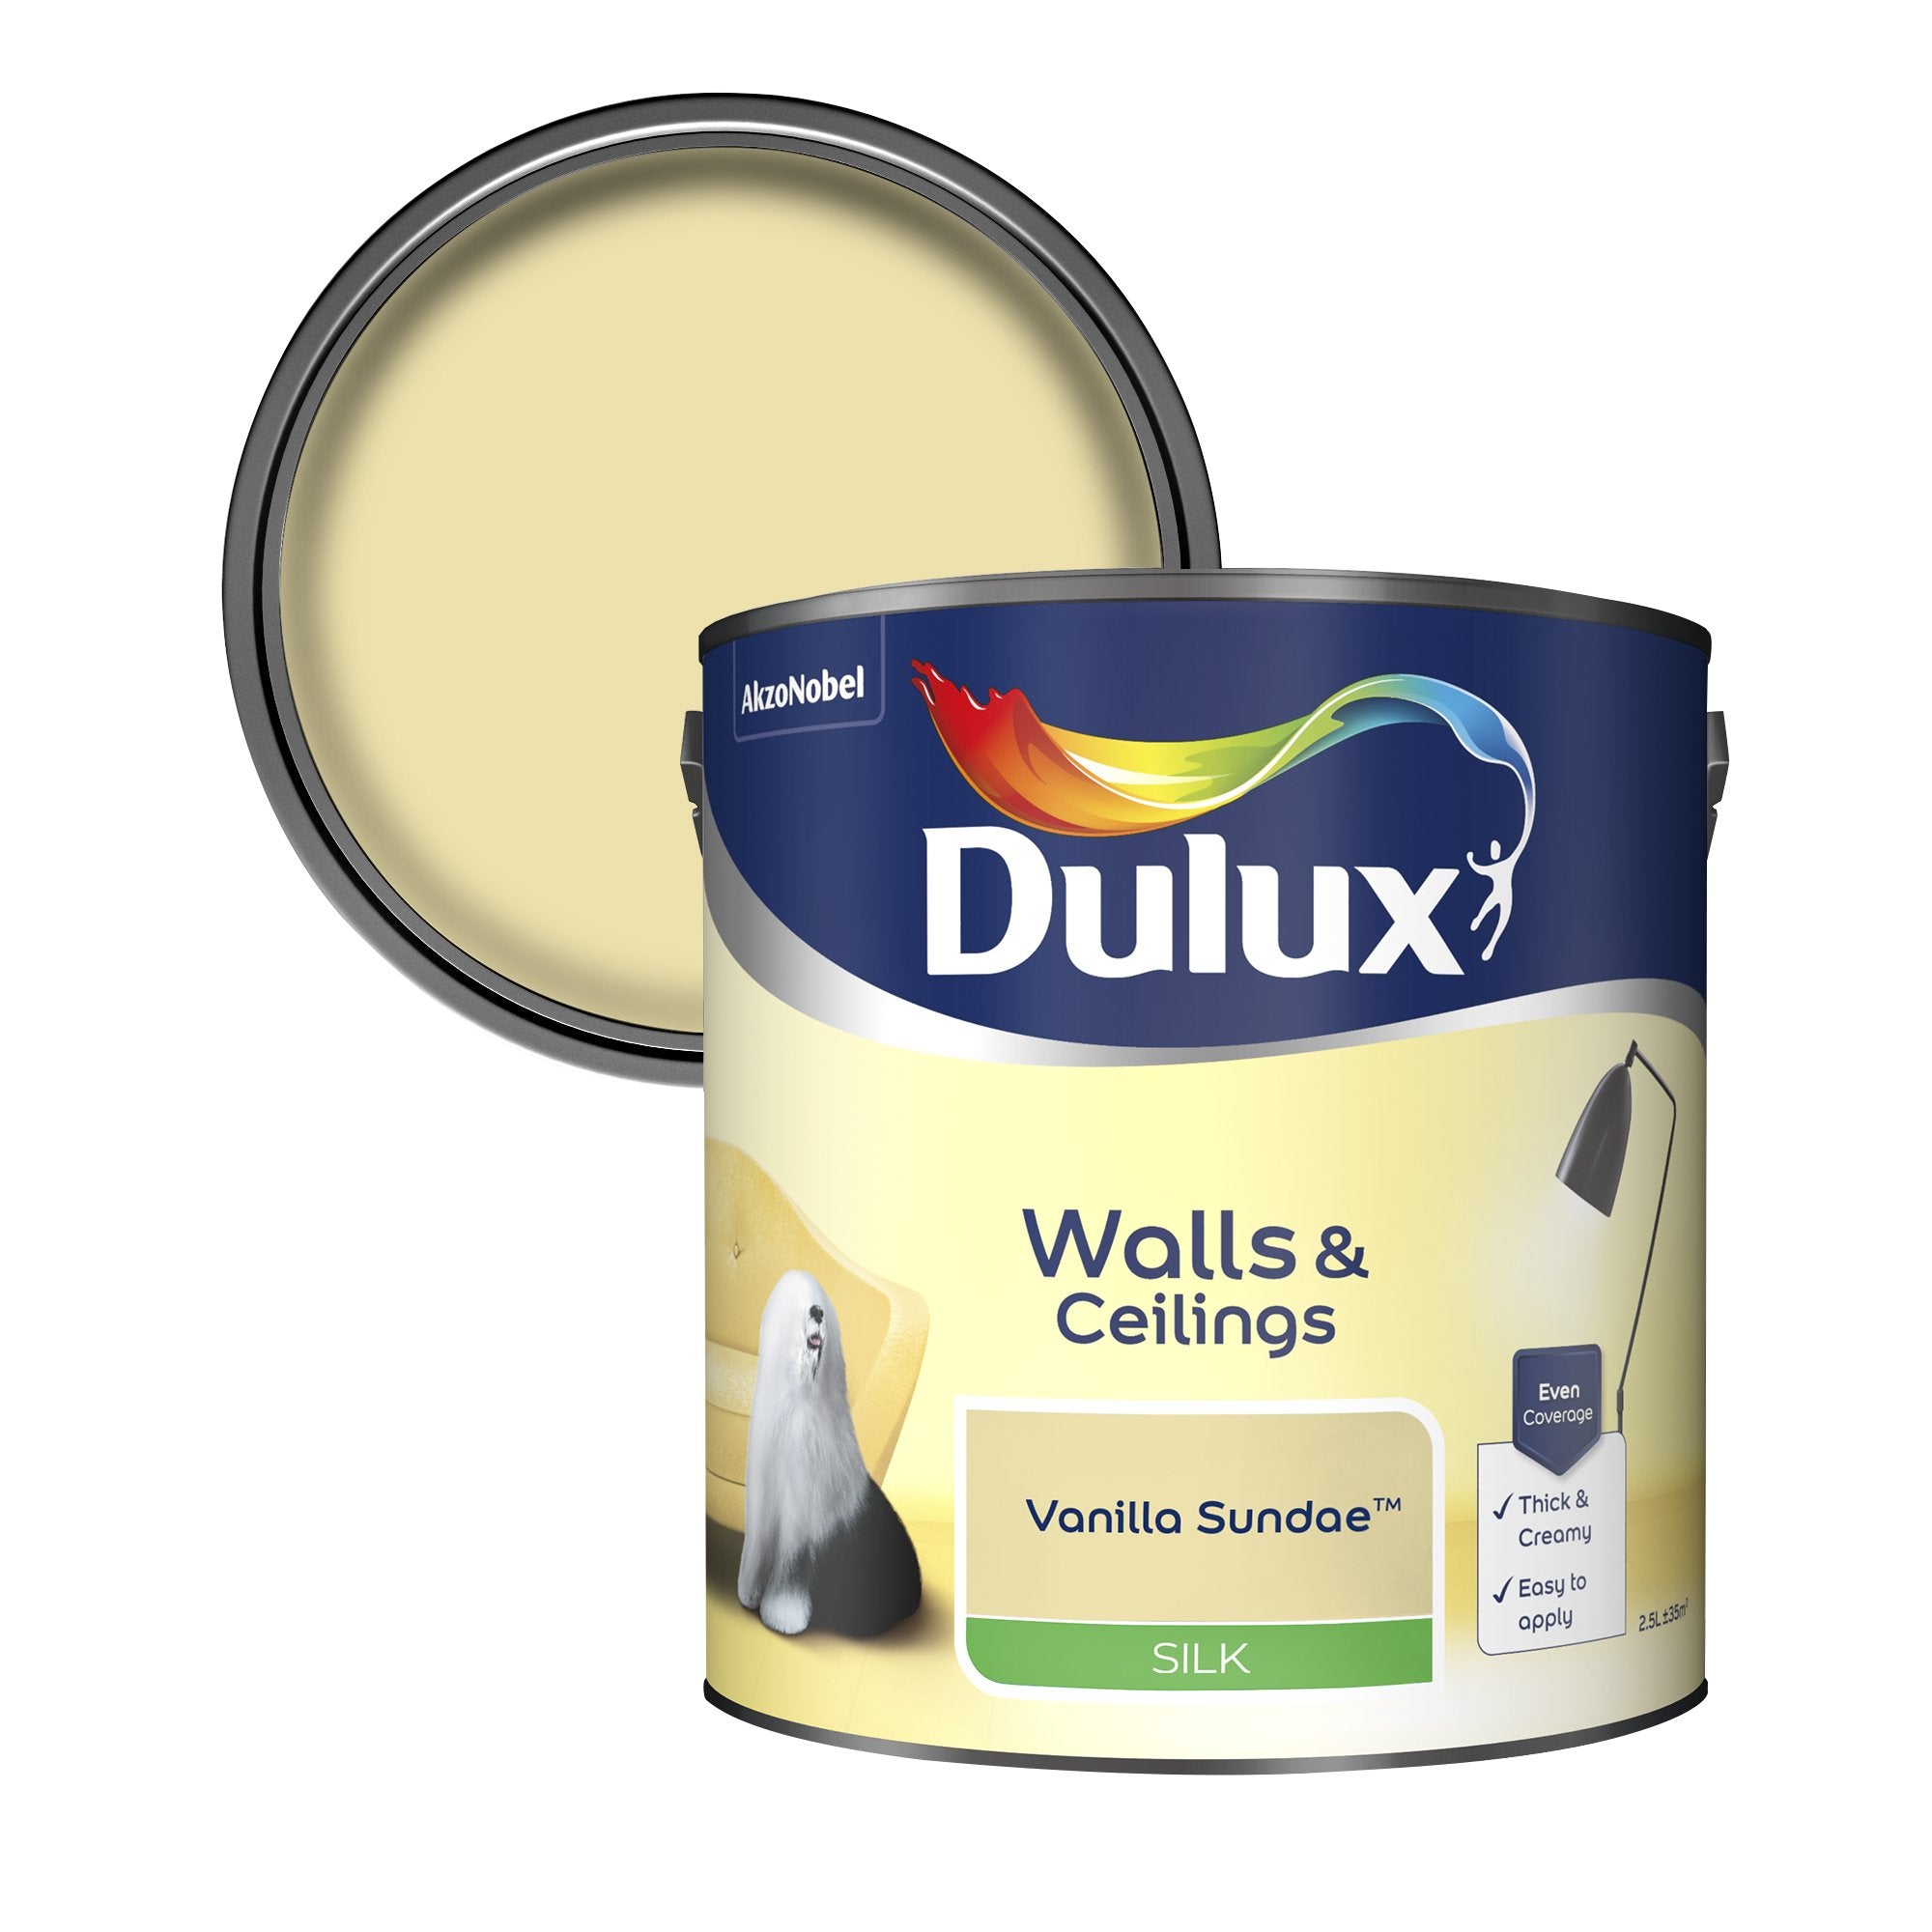 Dulux-Silk-Emulsion-Paint-For-Walls-And-Ceilings-Vanilla-Sundae-2.5L